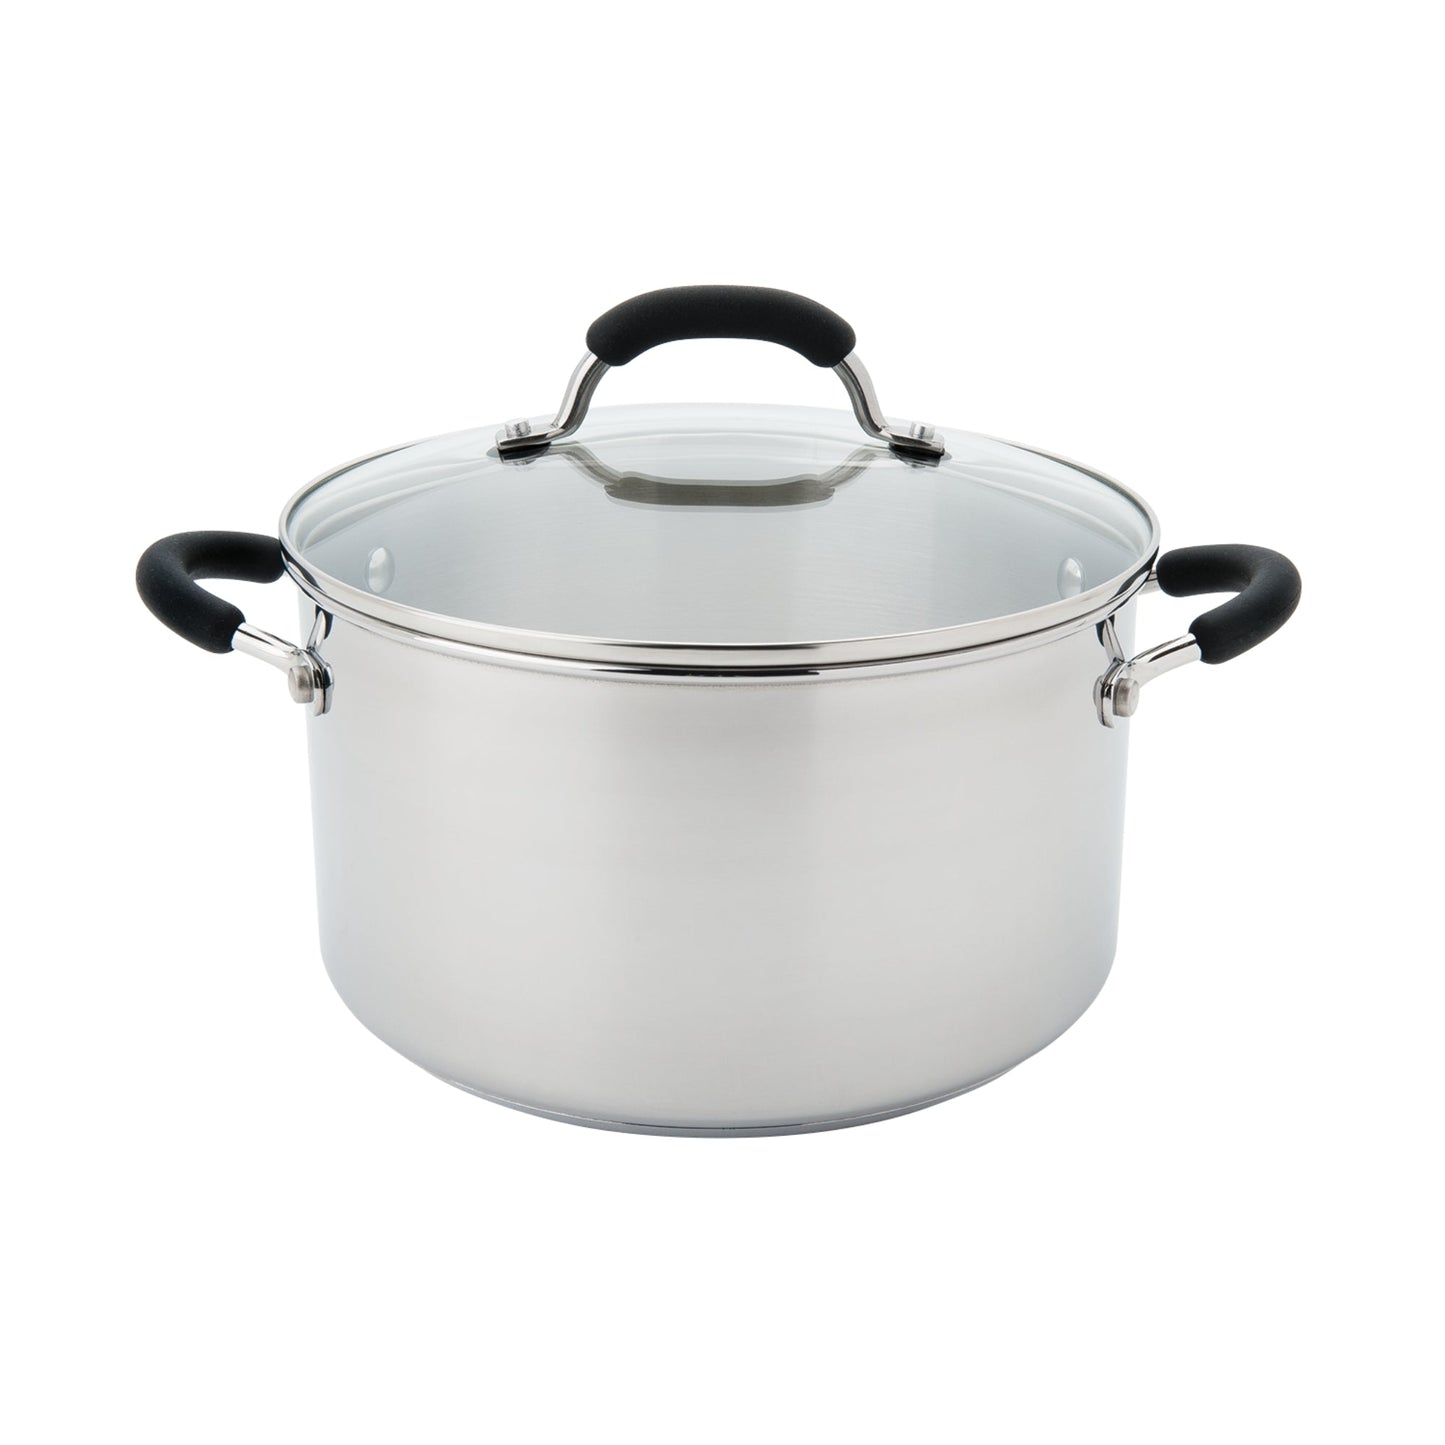 RACO Contemporary Stainless Steel Induction Stockpot 24cm/7.6L